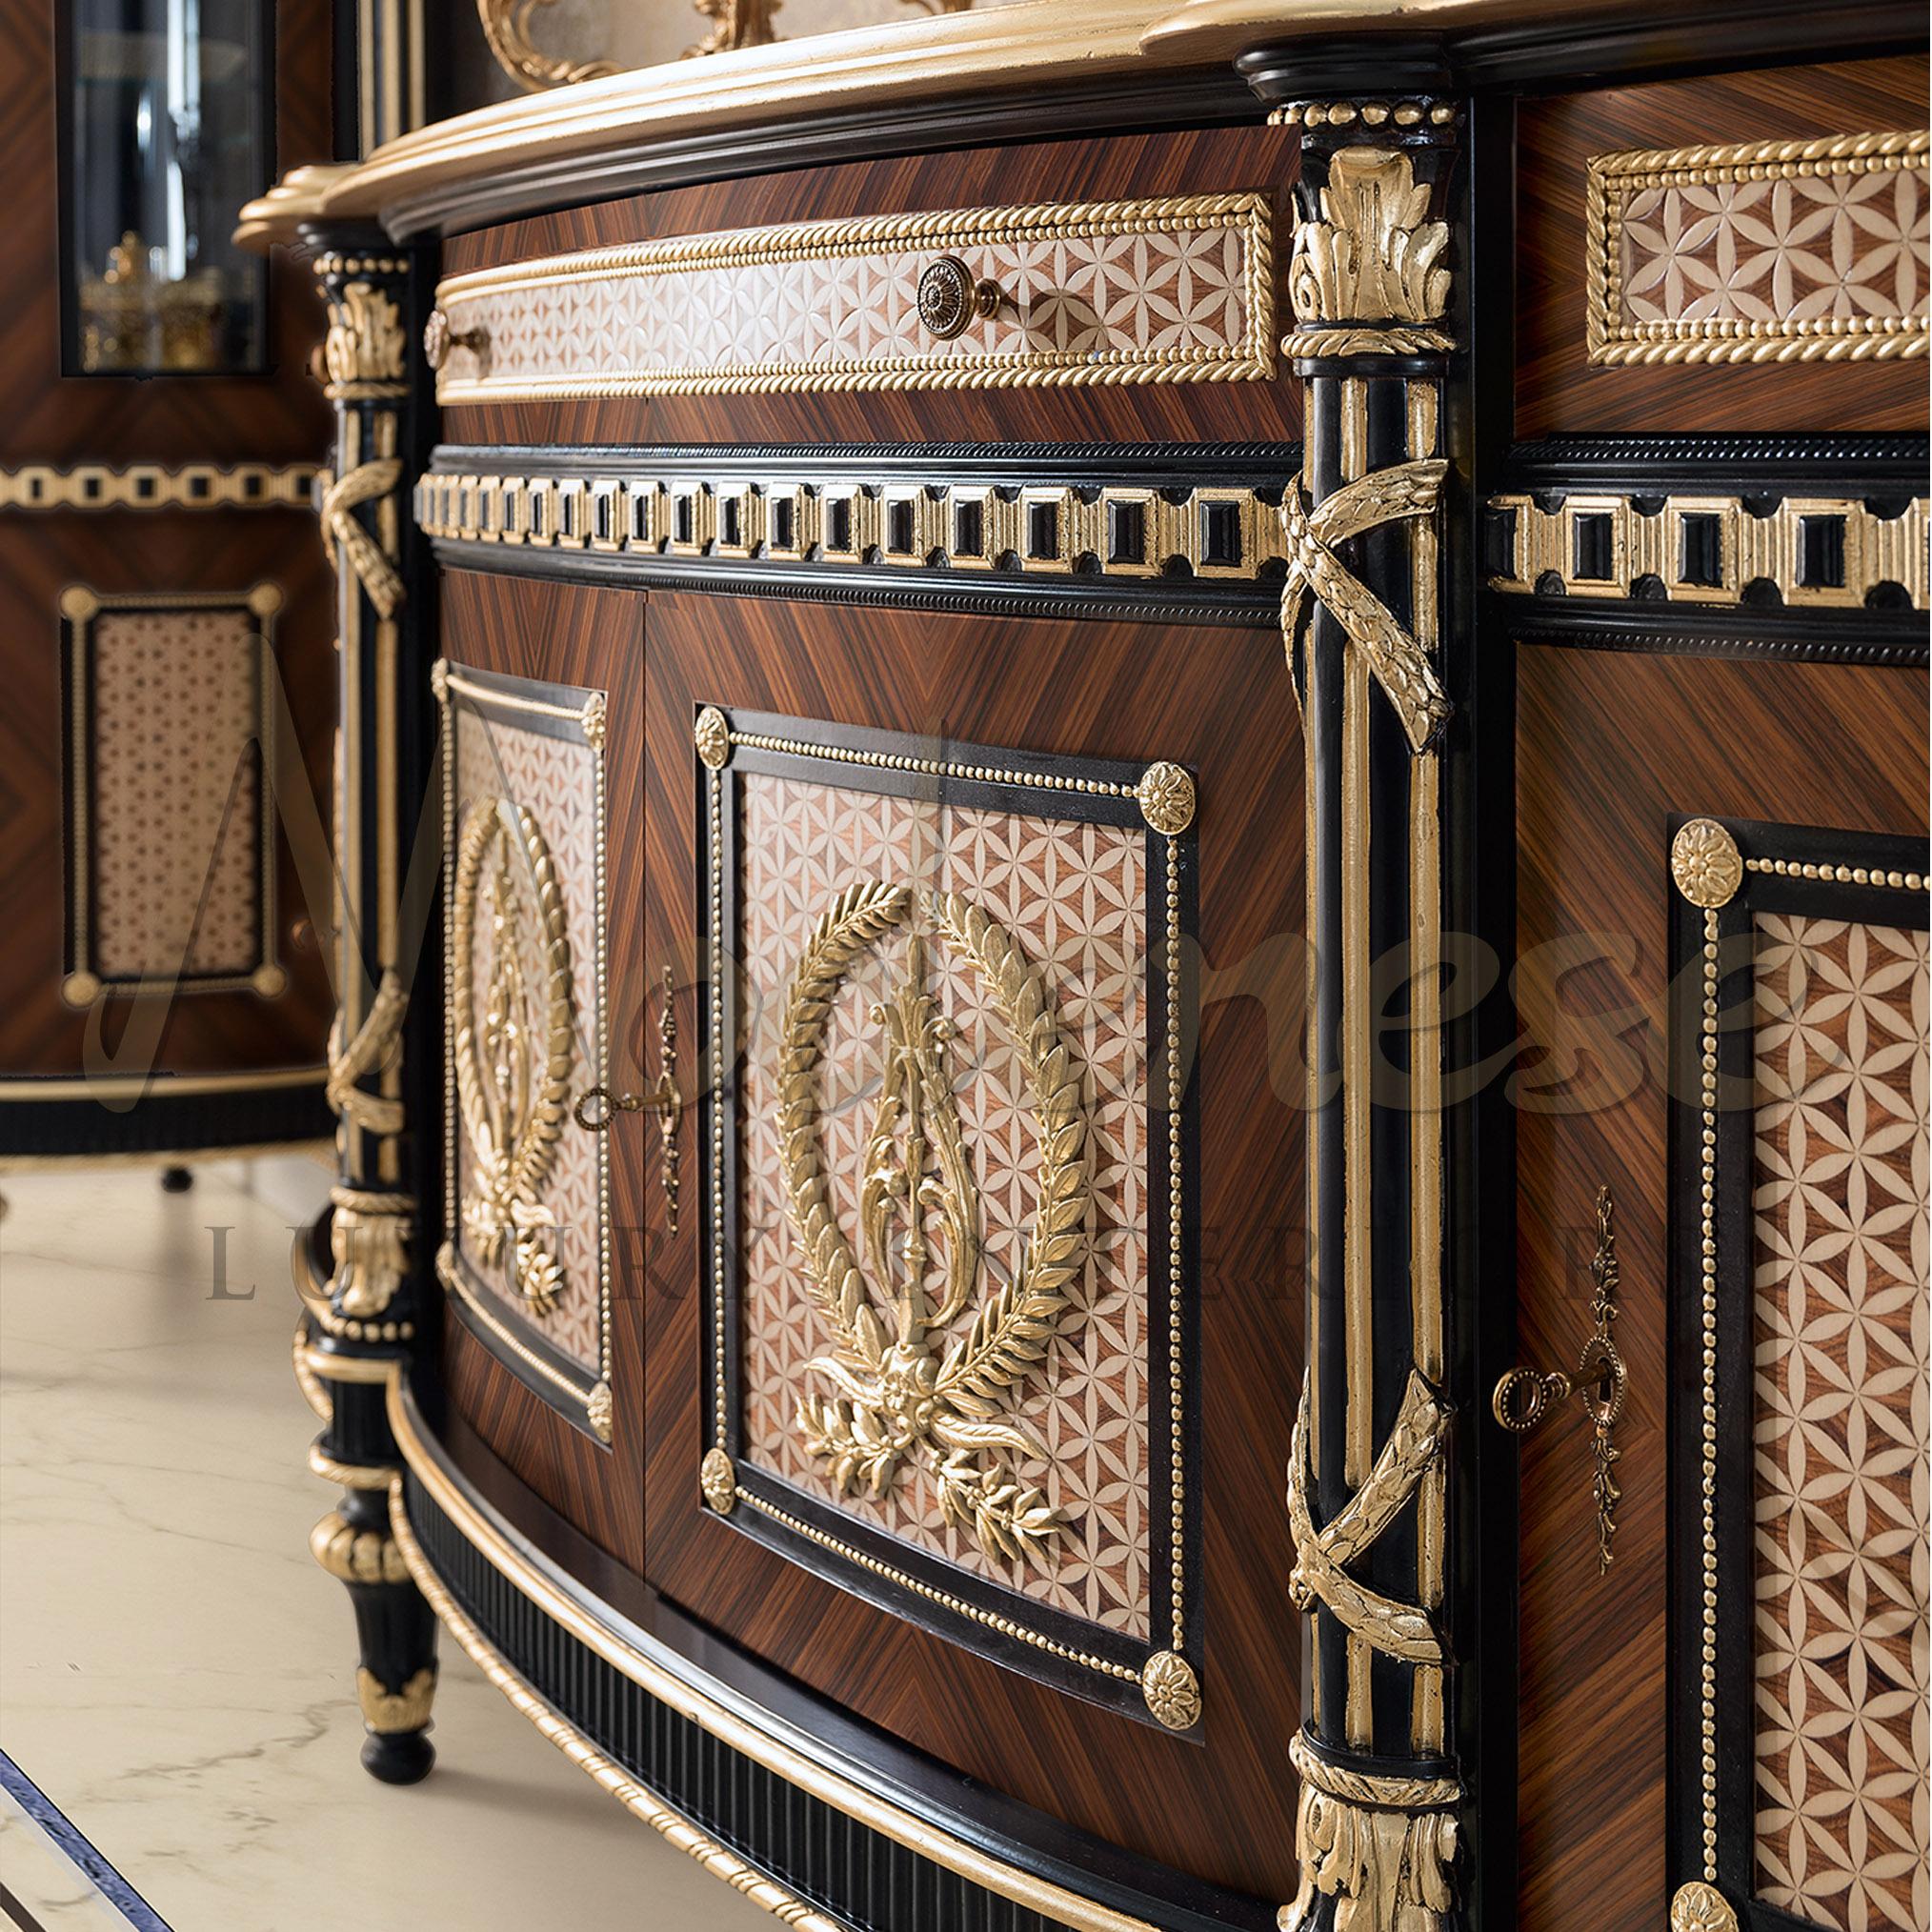 Our bespoke cradenza with exquisite marquetry inlay wood work. This re-imagine classic piece is truely representing the essence of Modense Luxury Interiors. Every wooden details has carefully designed and placed together to create this spell bound